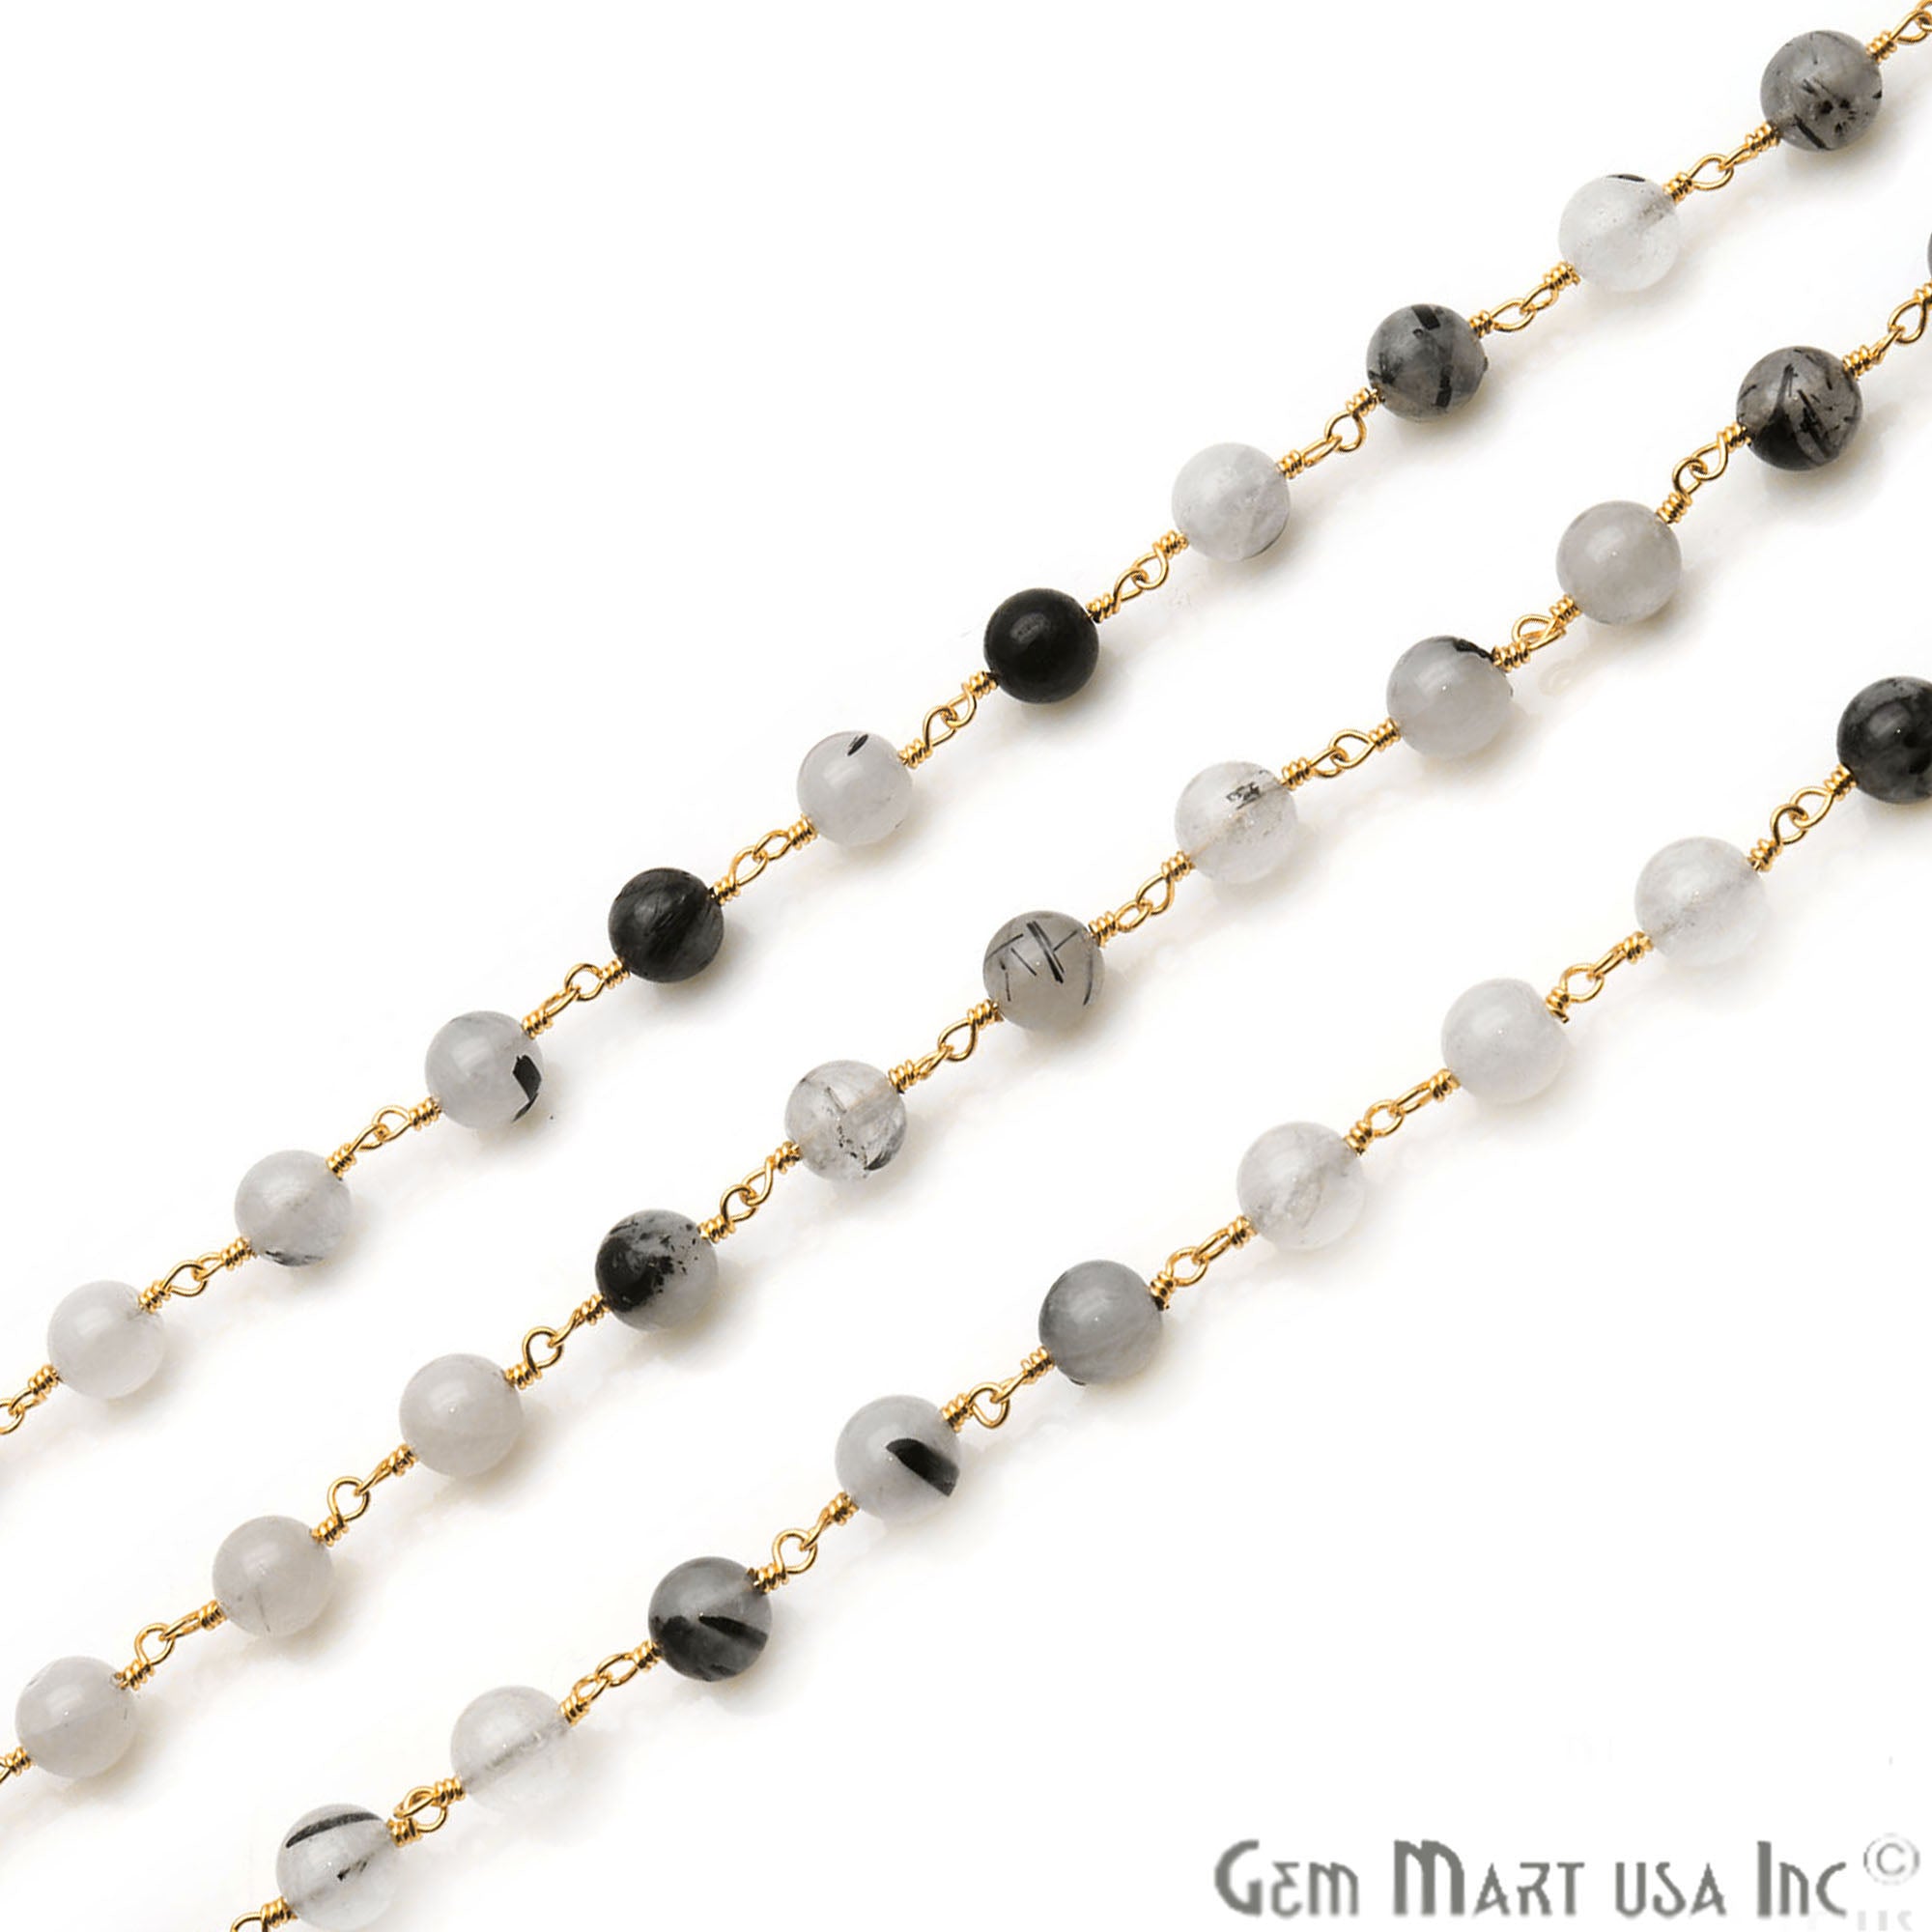 Rutilated Smooth Beads 6mm Gold Plated Wire Wrapped Rosary Chain - GemMartUSA